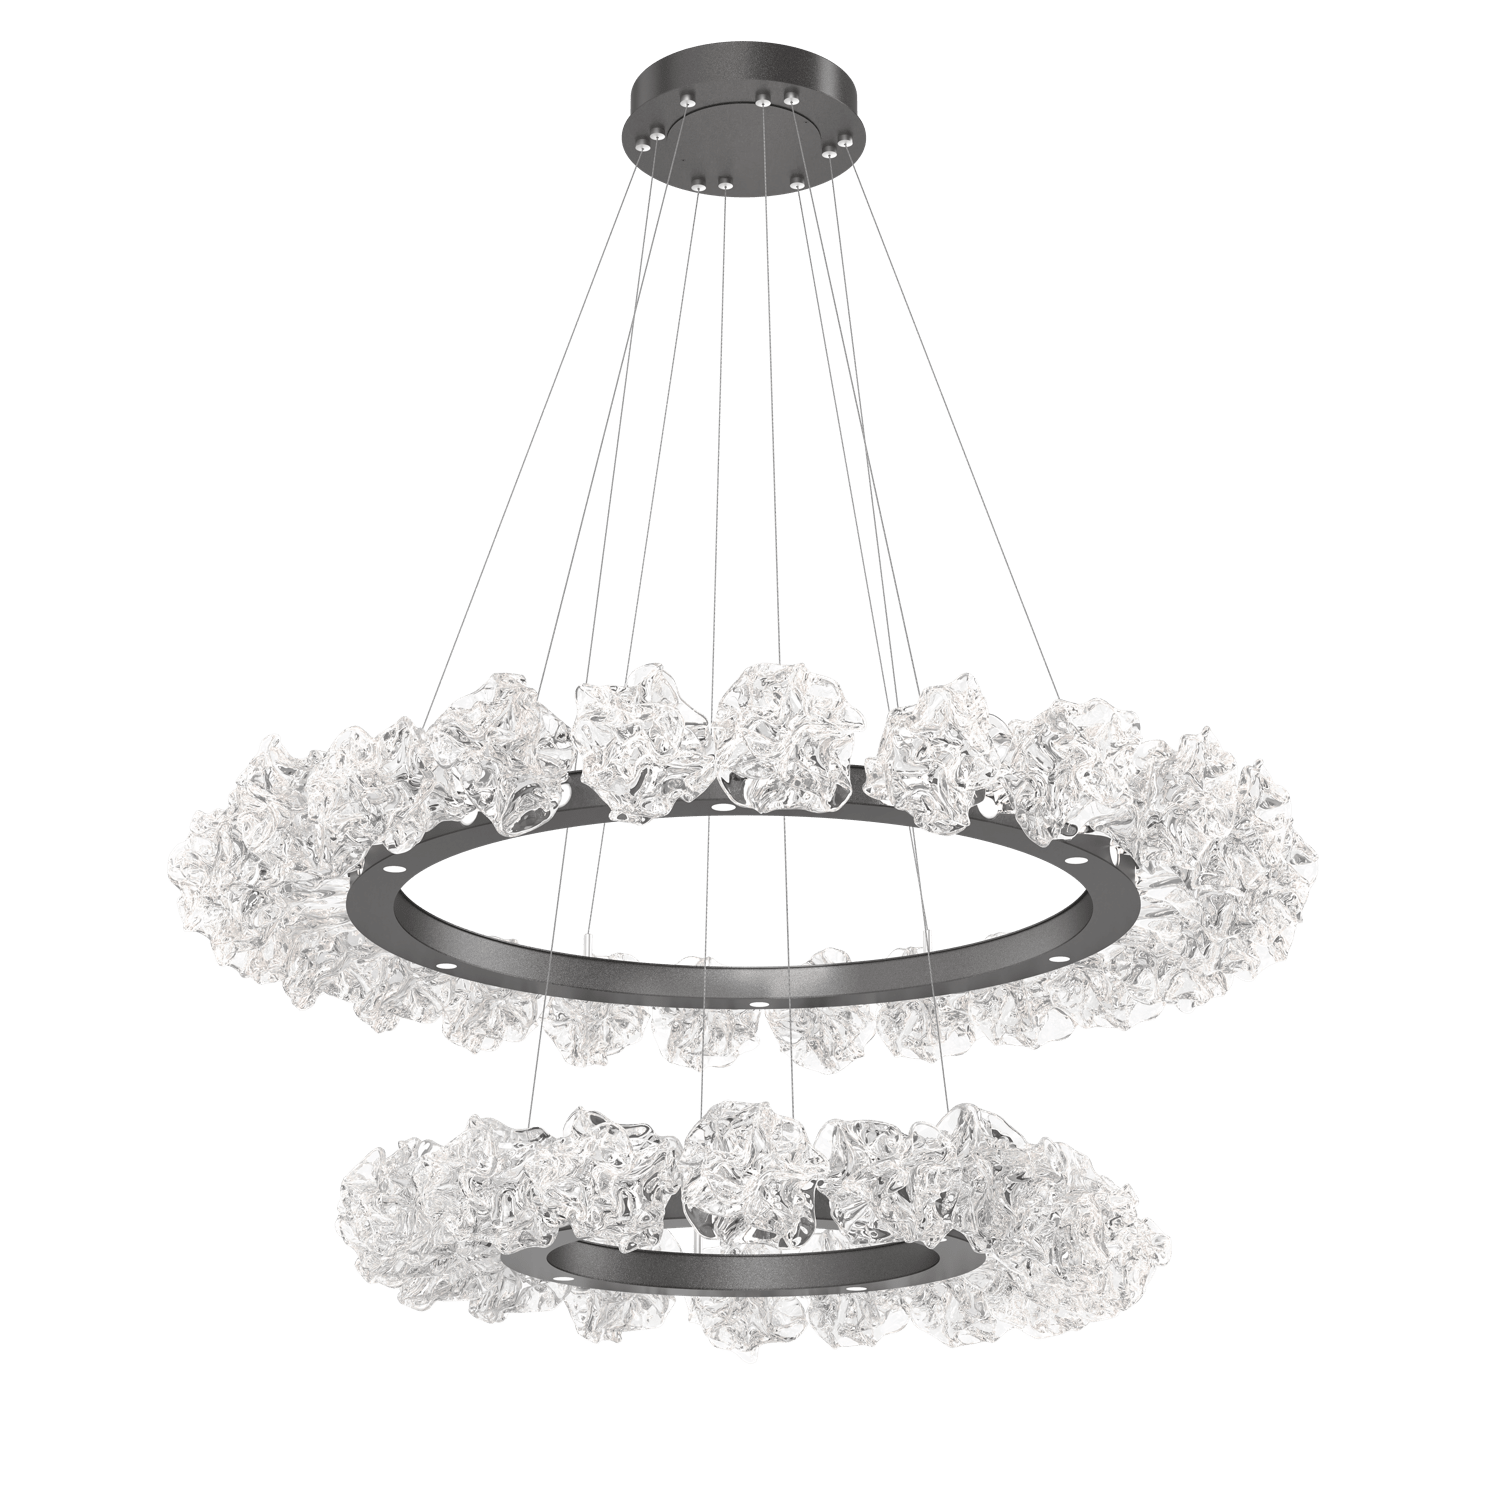 CHB0059-2B-GP-Hammerton-Studio-Blossom-50-inch-two-tier-radial-ring-chandelier-with-graphite-finish-and-clear-handblown-crystal-glass-shades-and-LED-lamping